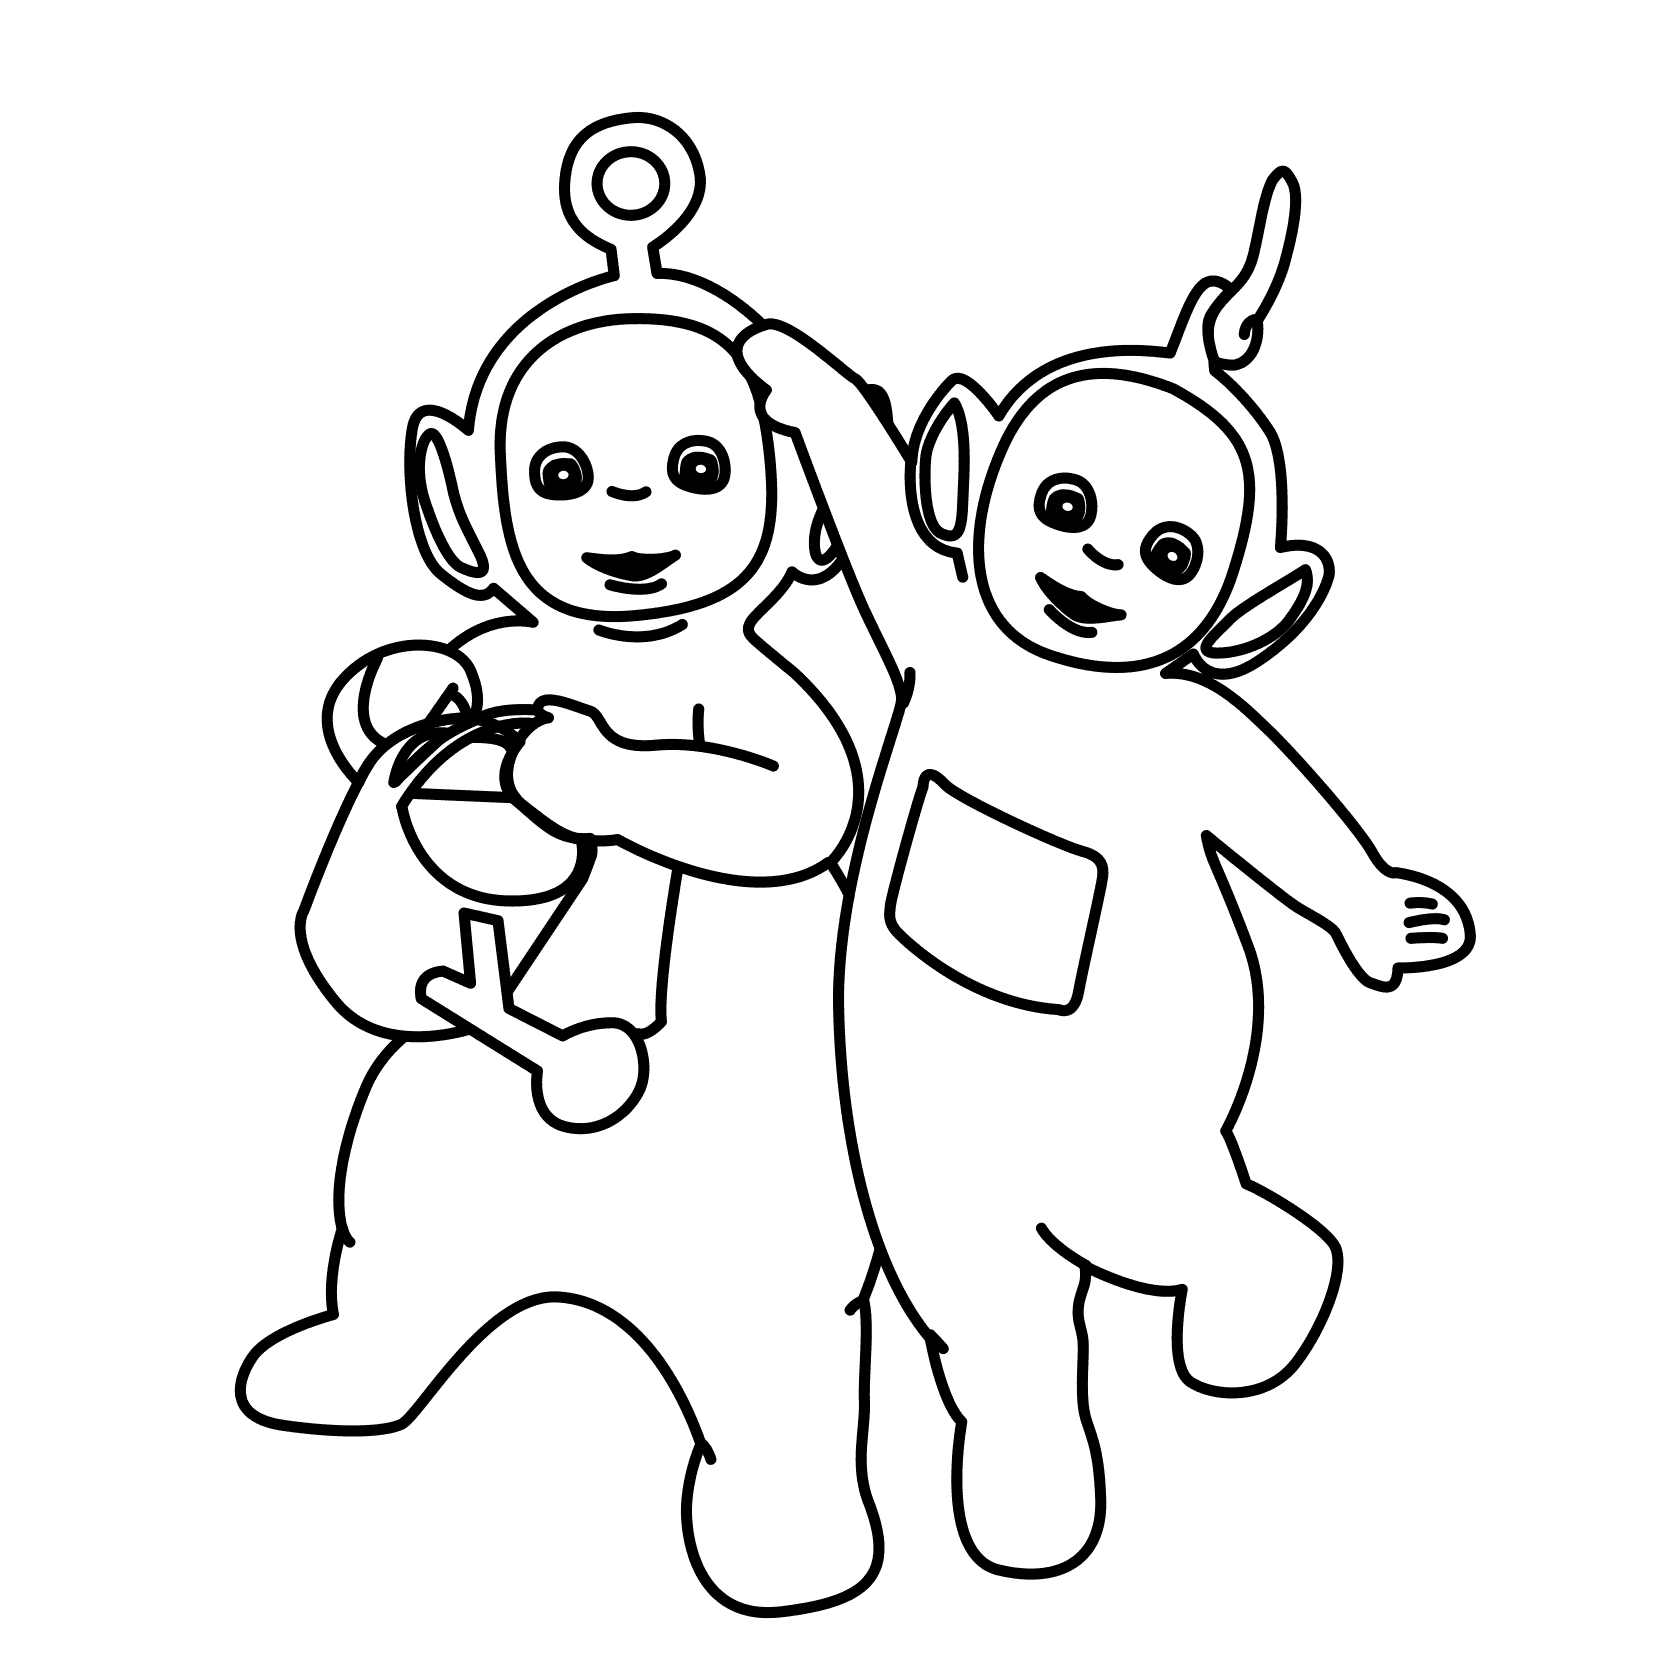 Teletubbies Coloring Pages TV Film Teletubbies Printable 2020 08503 Coloring4free